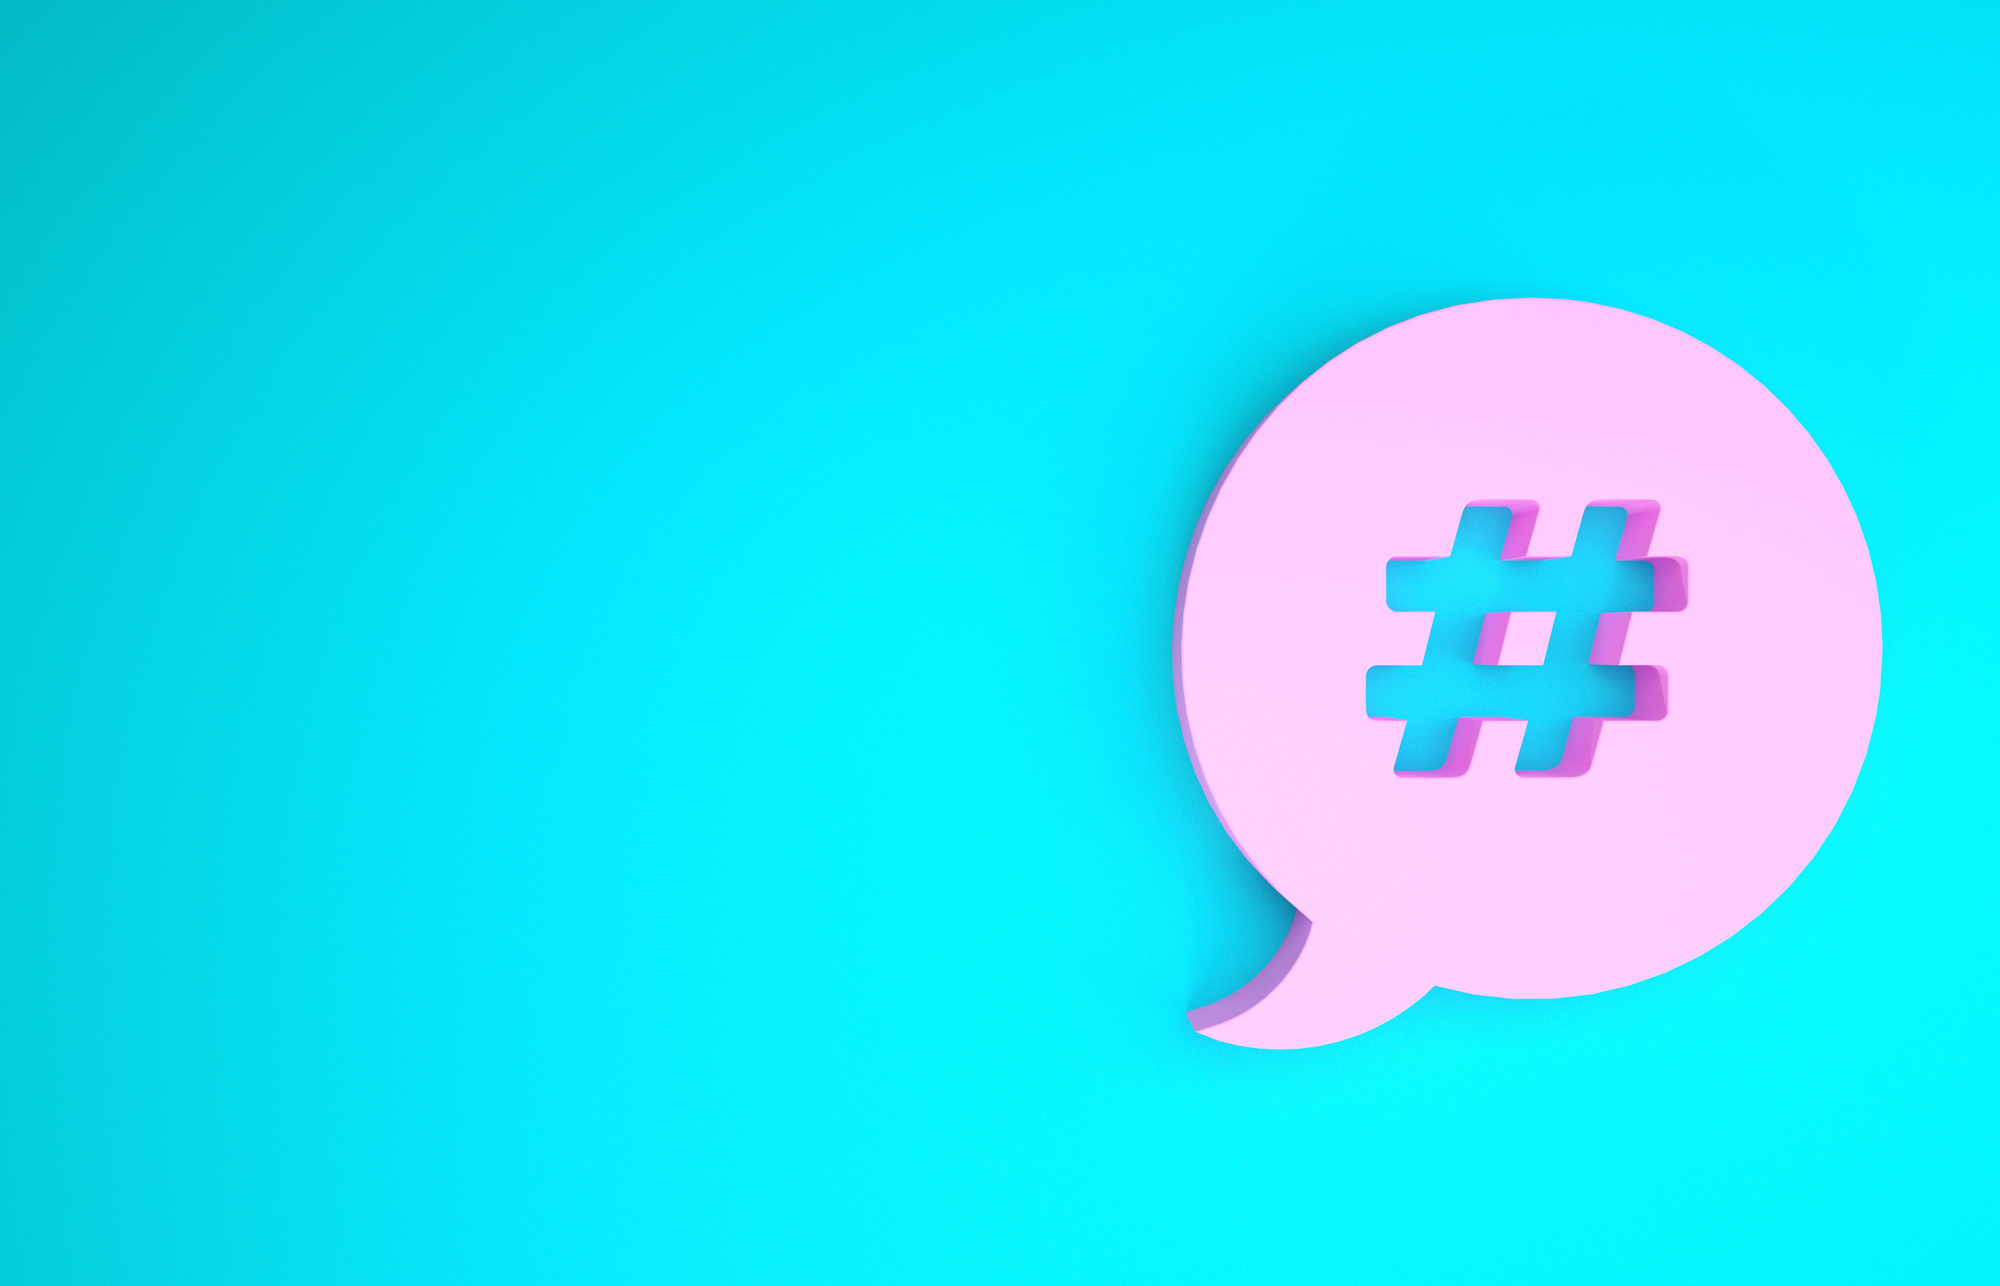 Pink Hashtag Speech Bubble Icon Isolated on Blue Background. Concept of Number Sign, Social Media Marketing, Micro Blogging. Minimalism Concept. 3D Illustration 3D Render